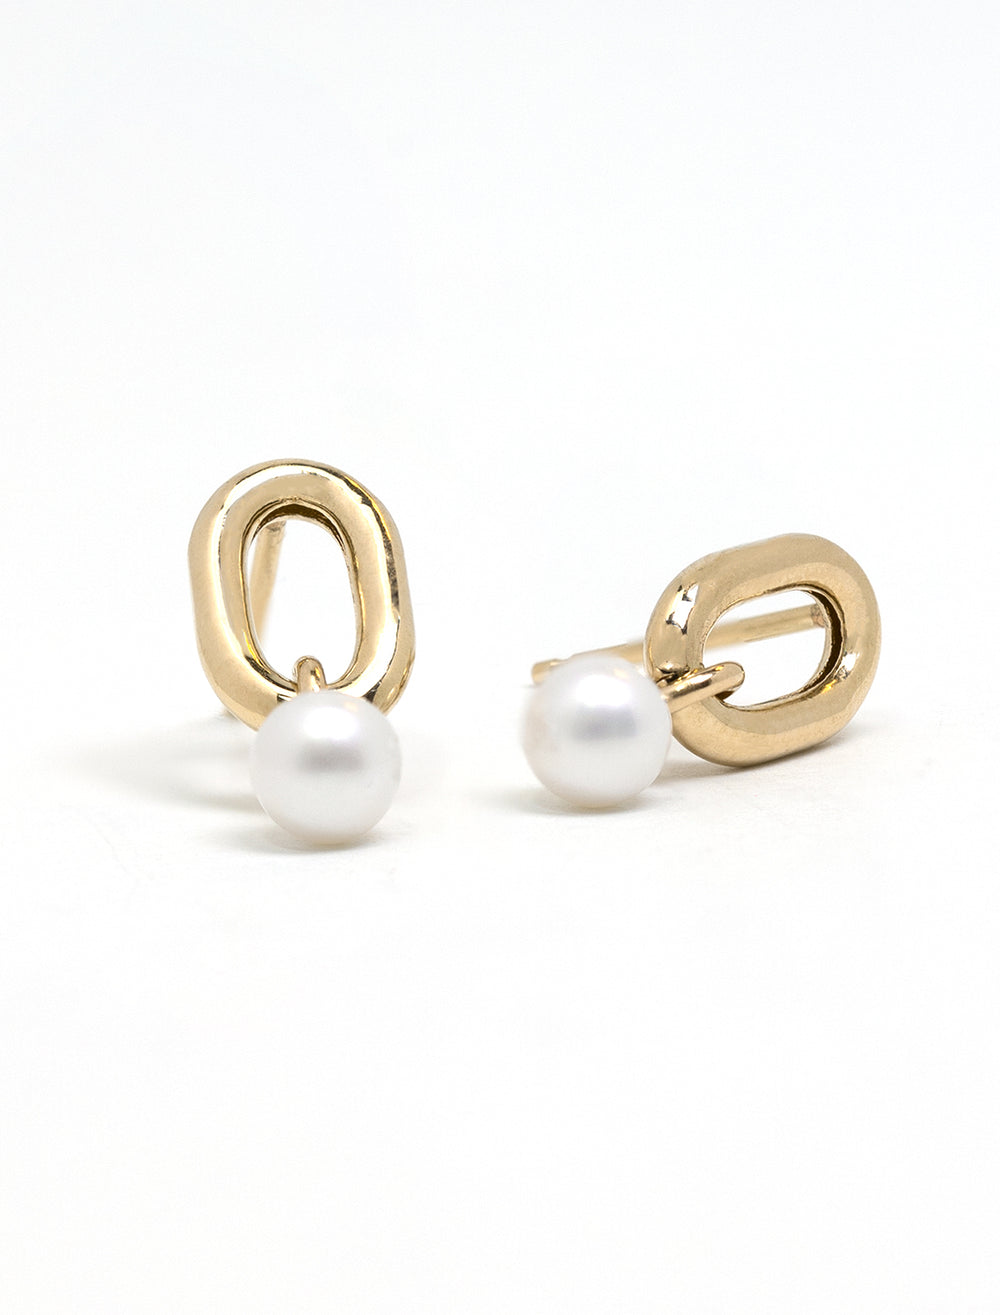 14k square oval link and pearl drop earrings (2)